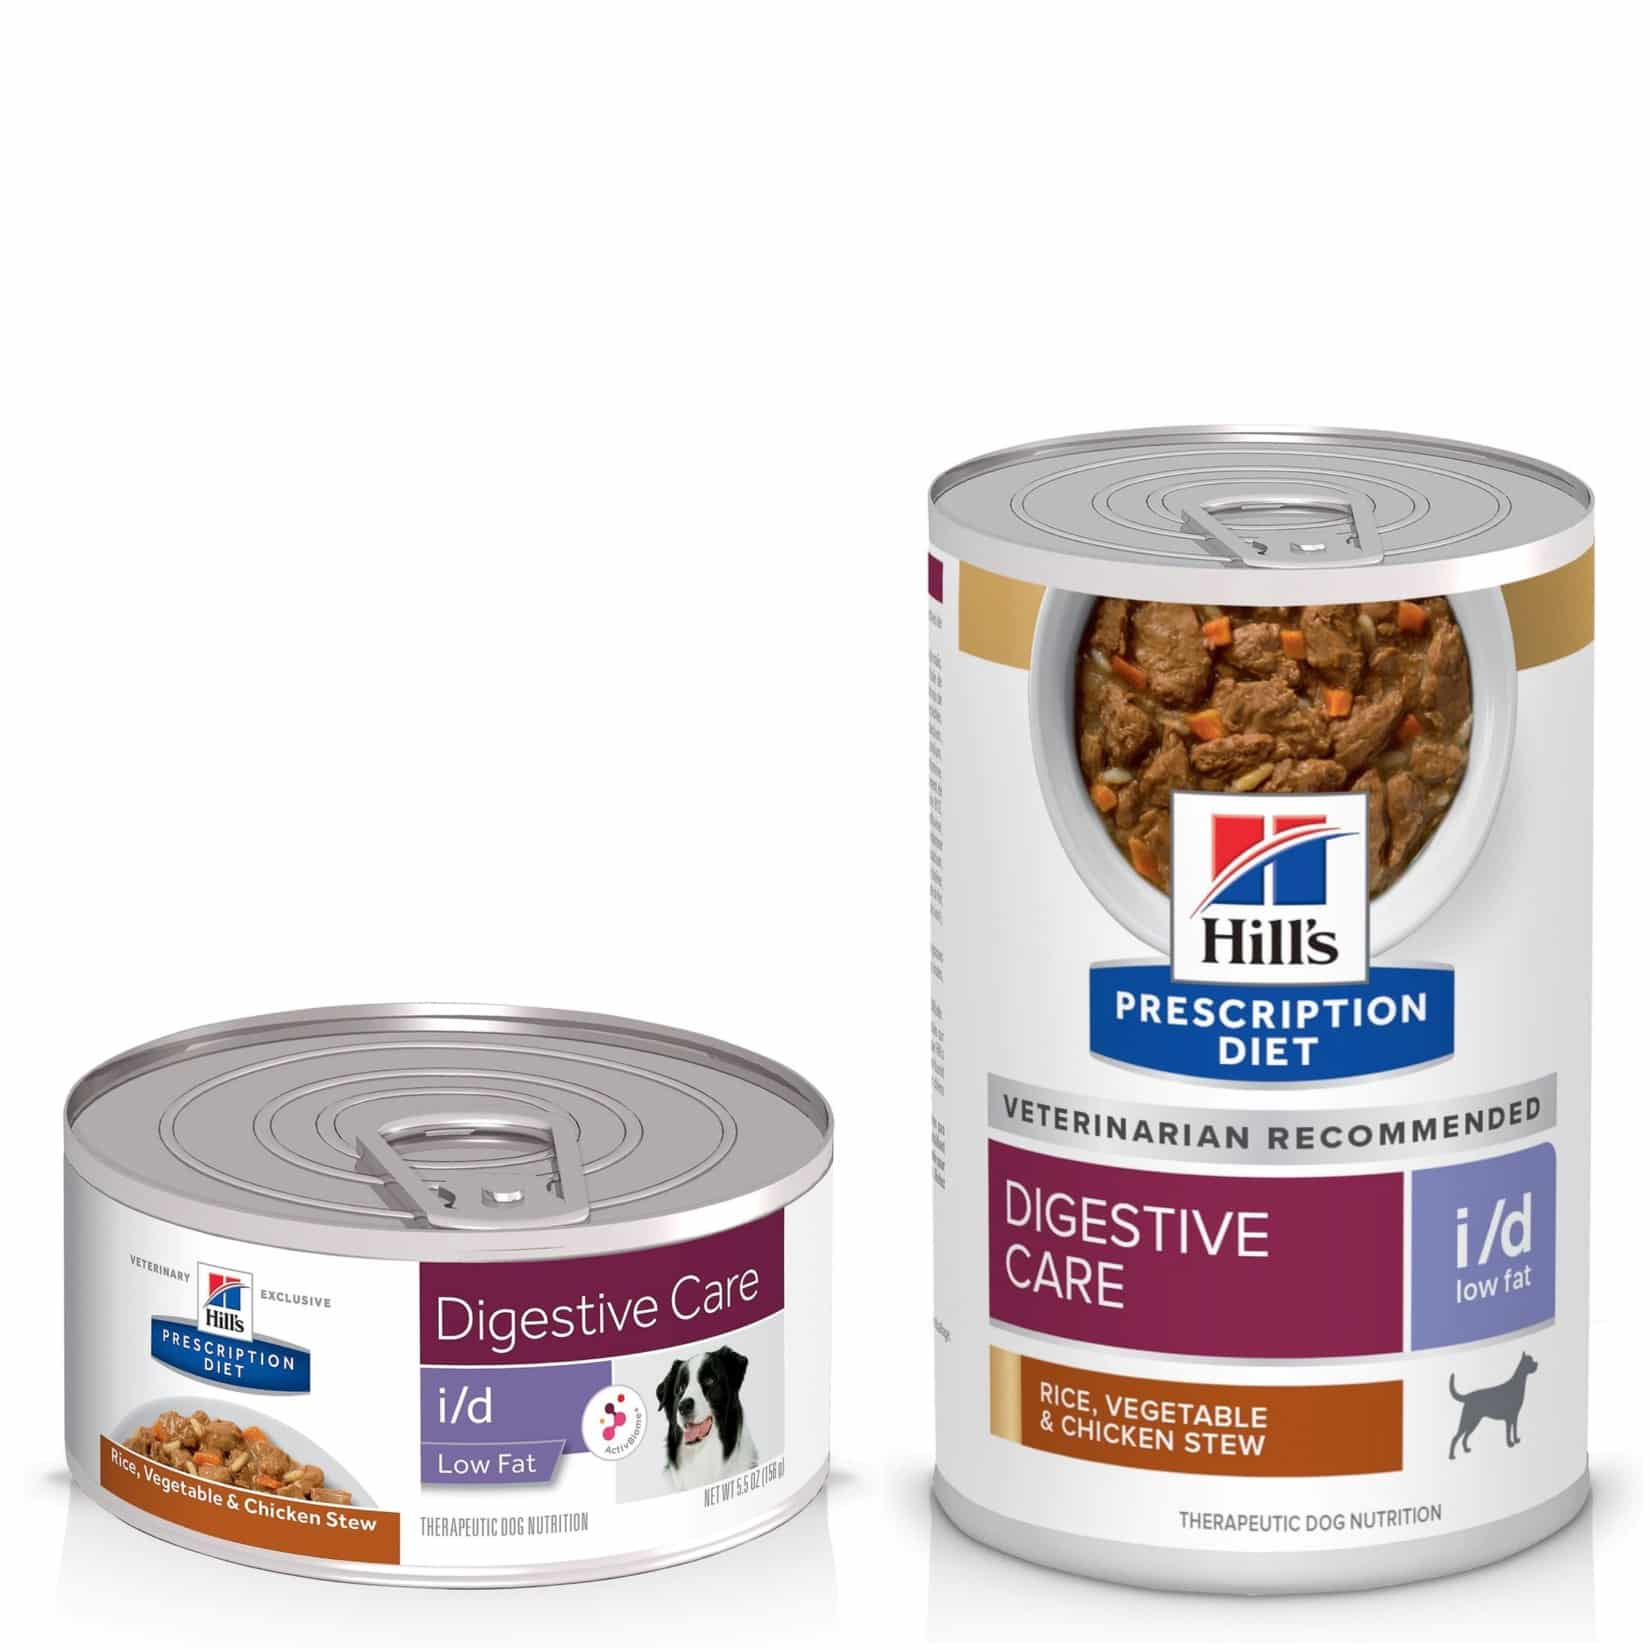 Hill's Prescription Diet id Digestive Care Low Fat Rice, Vegetable & Chicken Stew Wet Dog Food